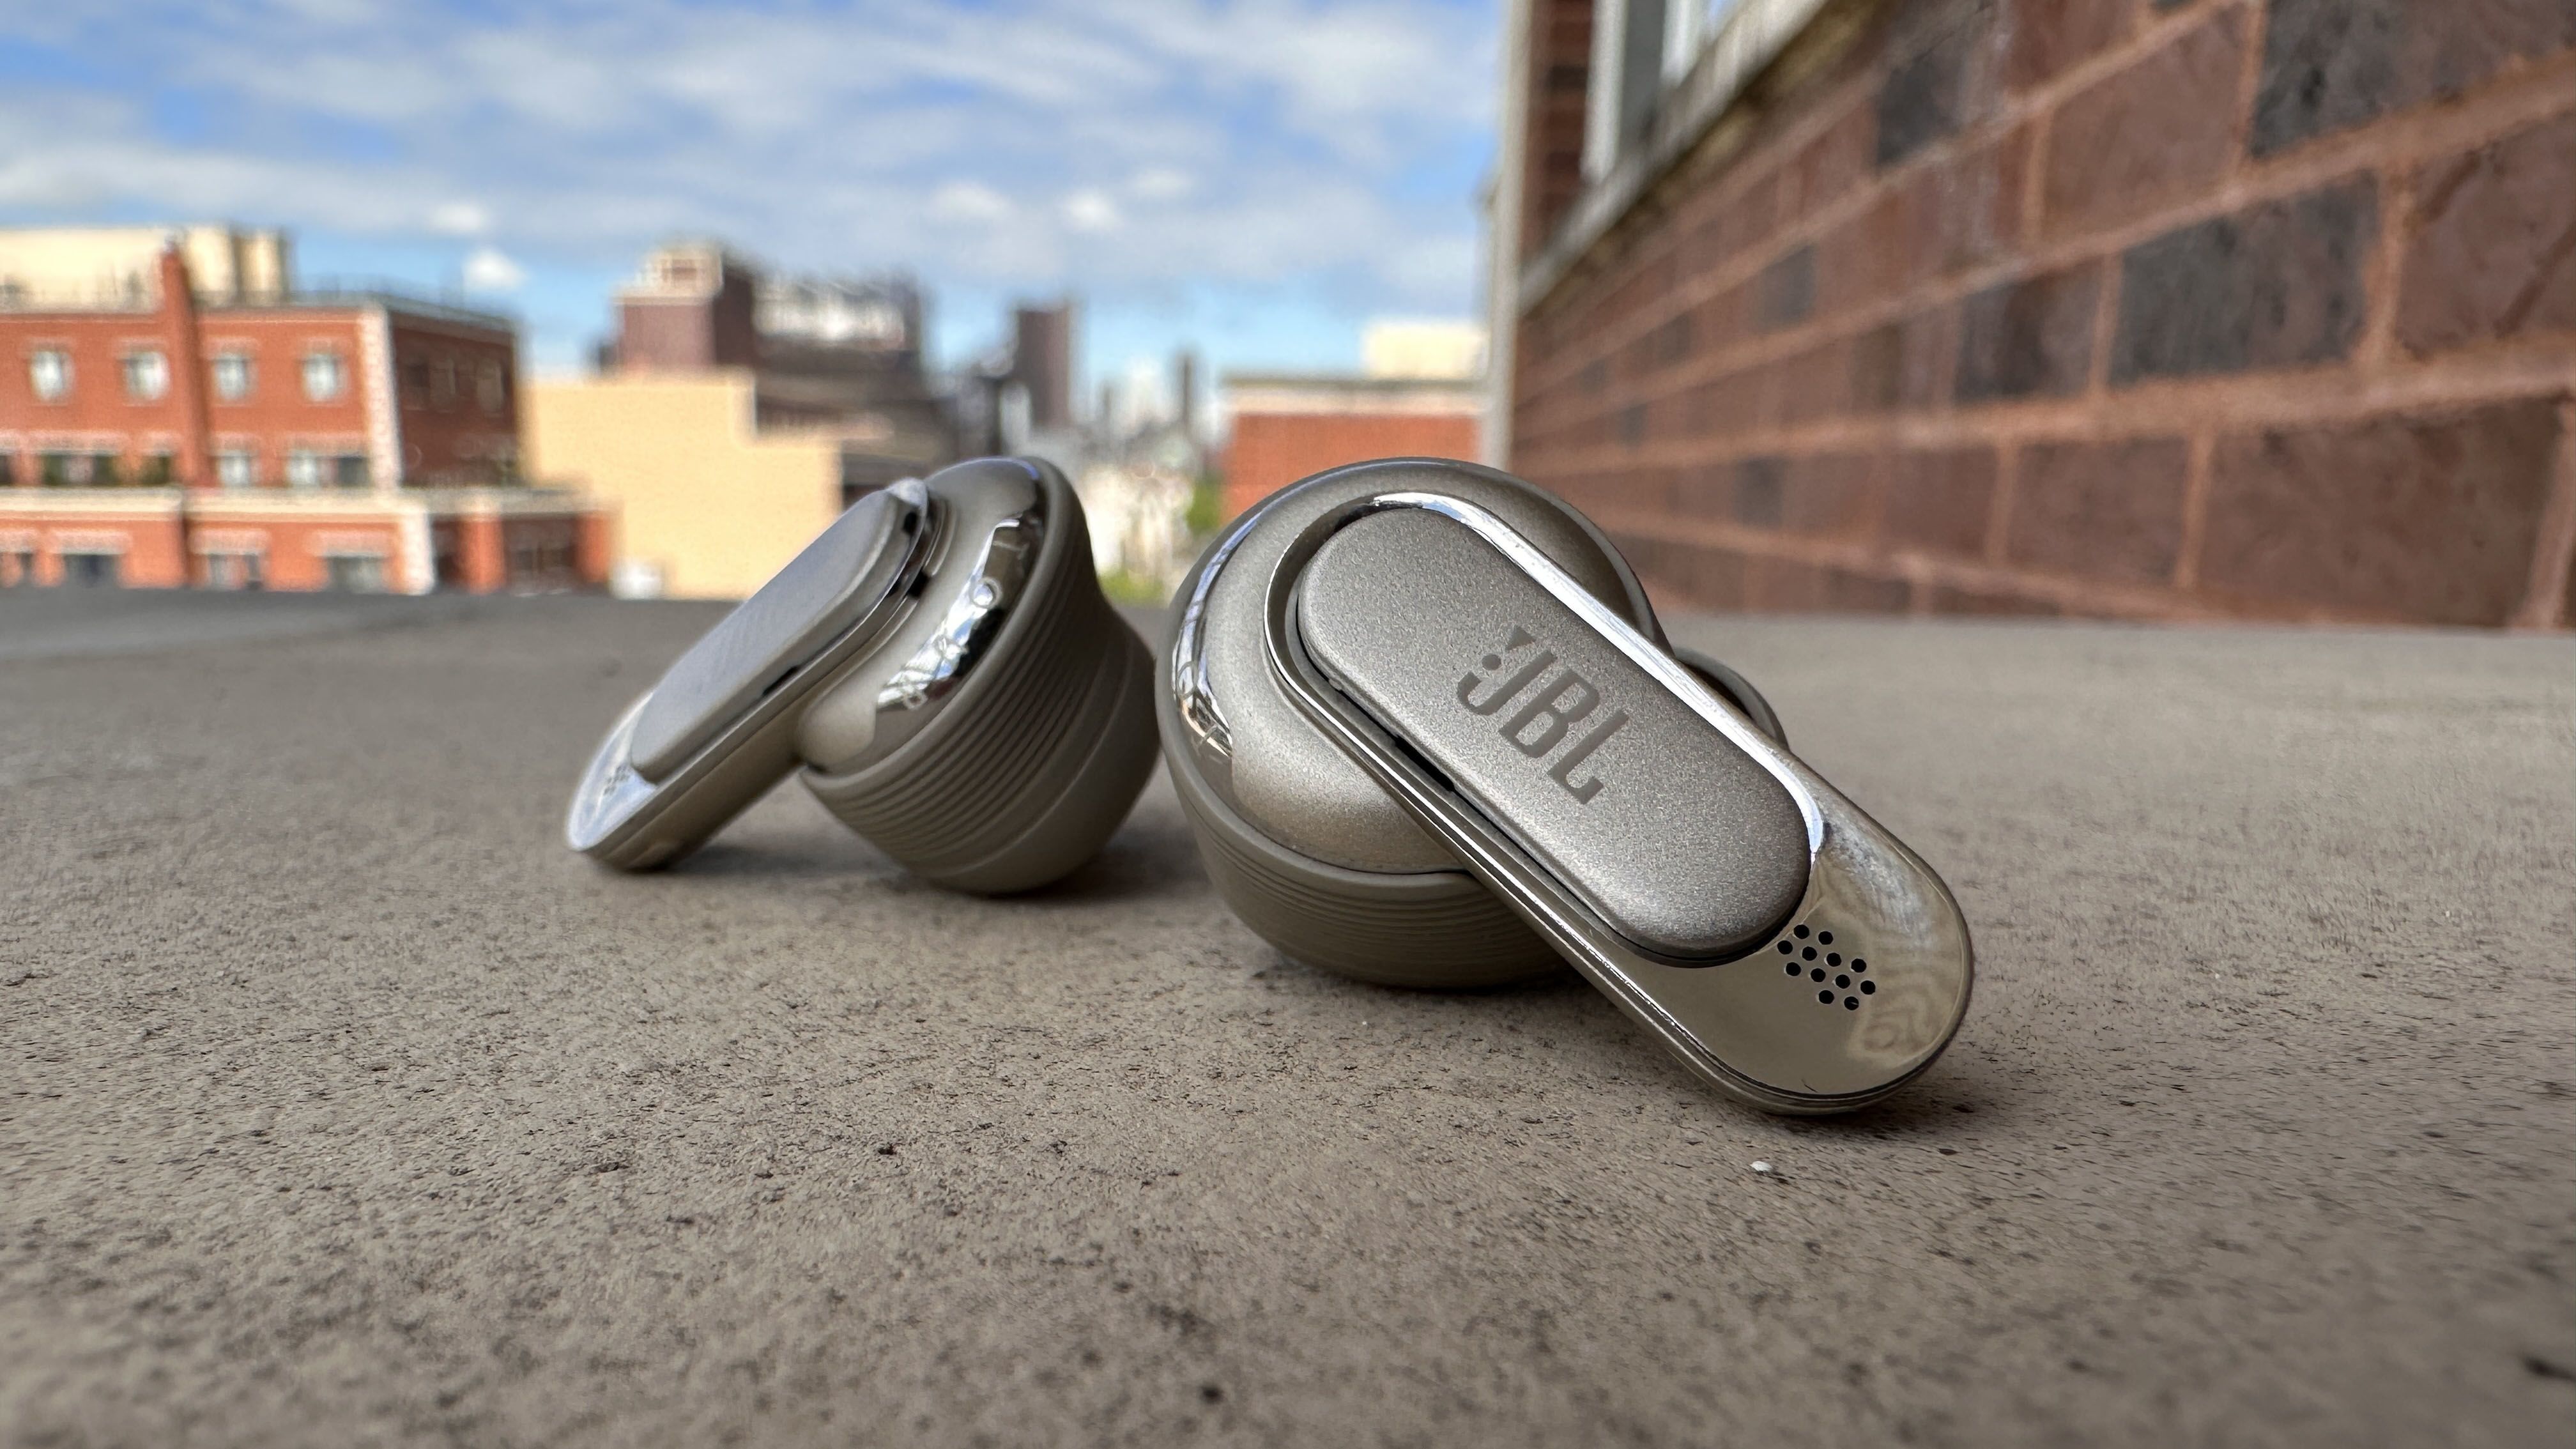 Review: JBL Tour Pro 2 Wireless Earbuds - FOOTBALL FASHION